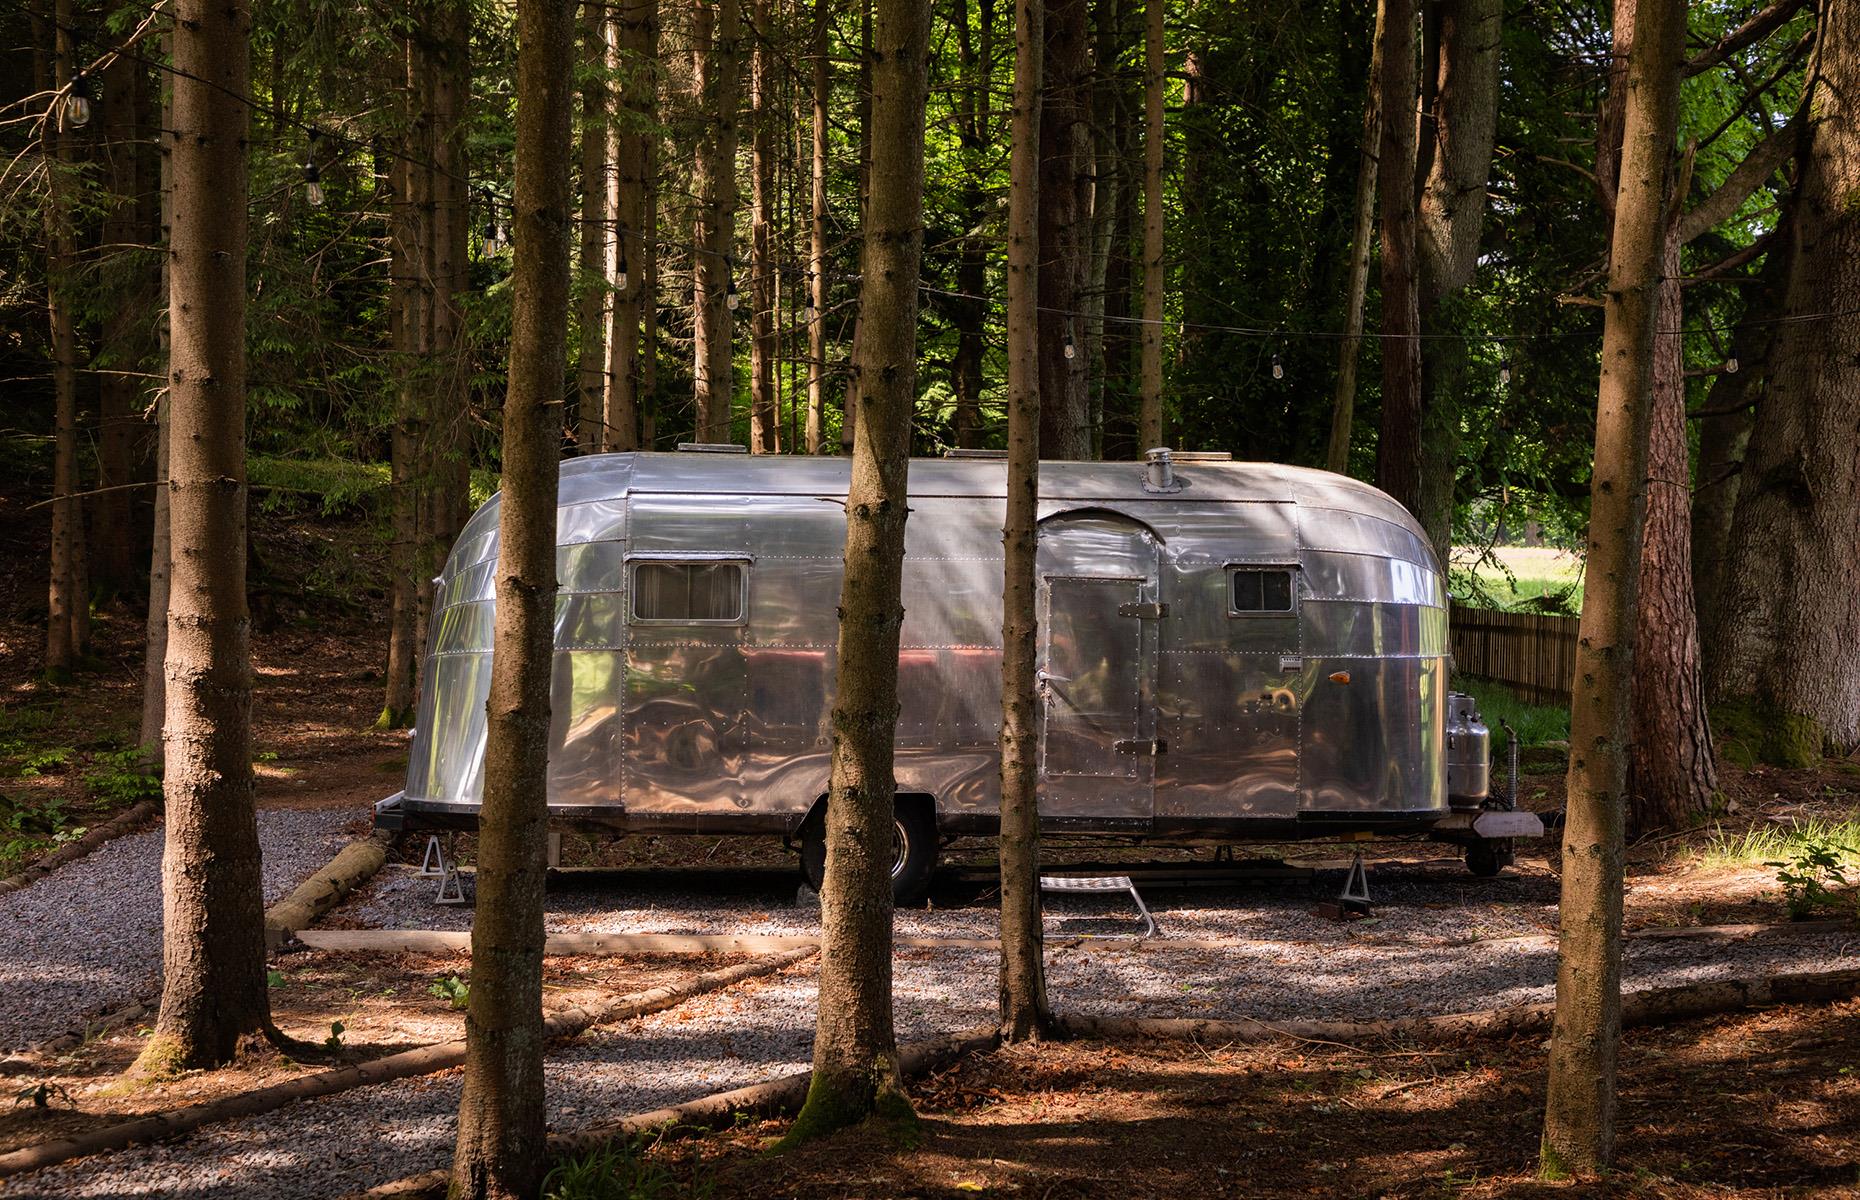 <p>If you go down to the woods of the wonderfully remote and rural <a href="https://www.canopyandstars.co.uk/britain/scotland/aberdeenshire/glen-dye-estate/the-saw-mill">Glen Dye Estate</a>, you might be surprised to find this shimmering Airstream in a private clearing in the forest. With a rustic wood-paneled interior, it has a super king-size bed and a record player and the nearby hut offers a space to lounge around and cook meals when the weather's not on your side. There's even an outdoor, wood-fired bathtub for toasty evening soaks.</p>